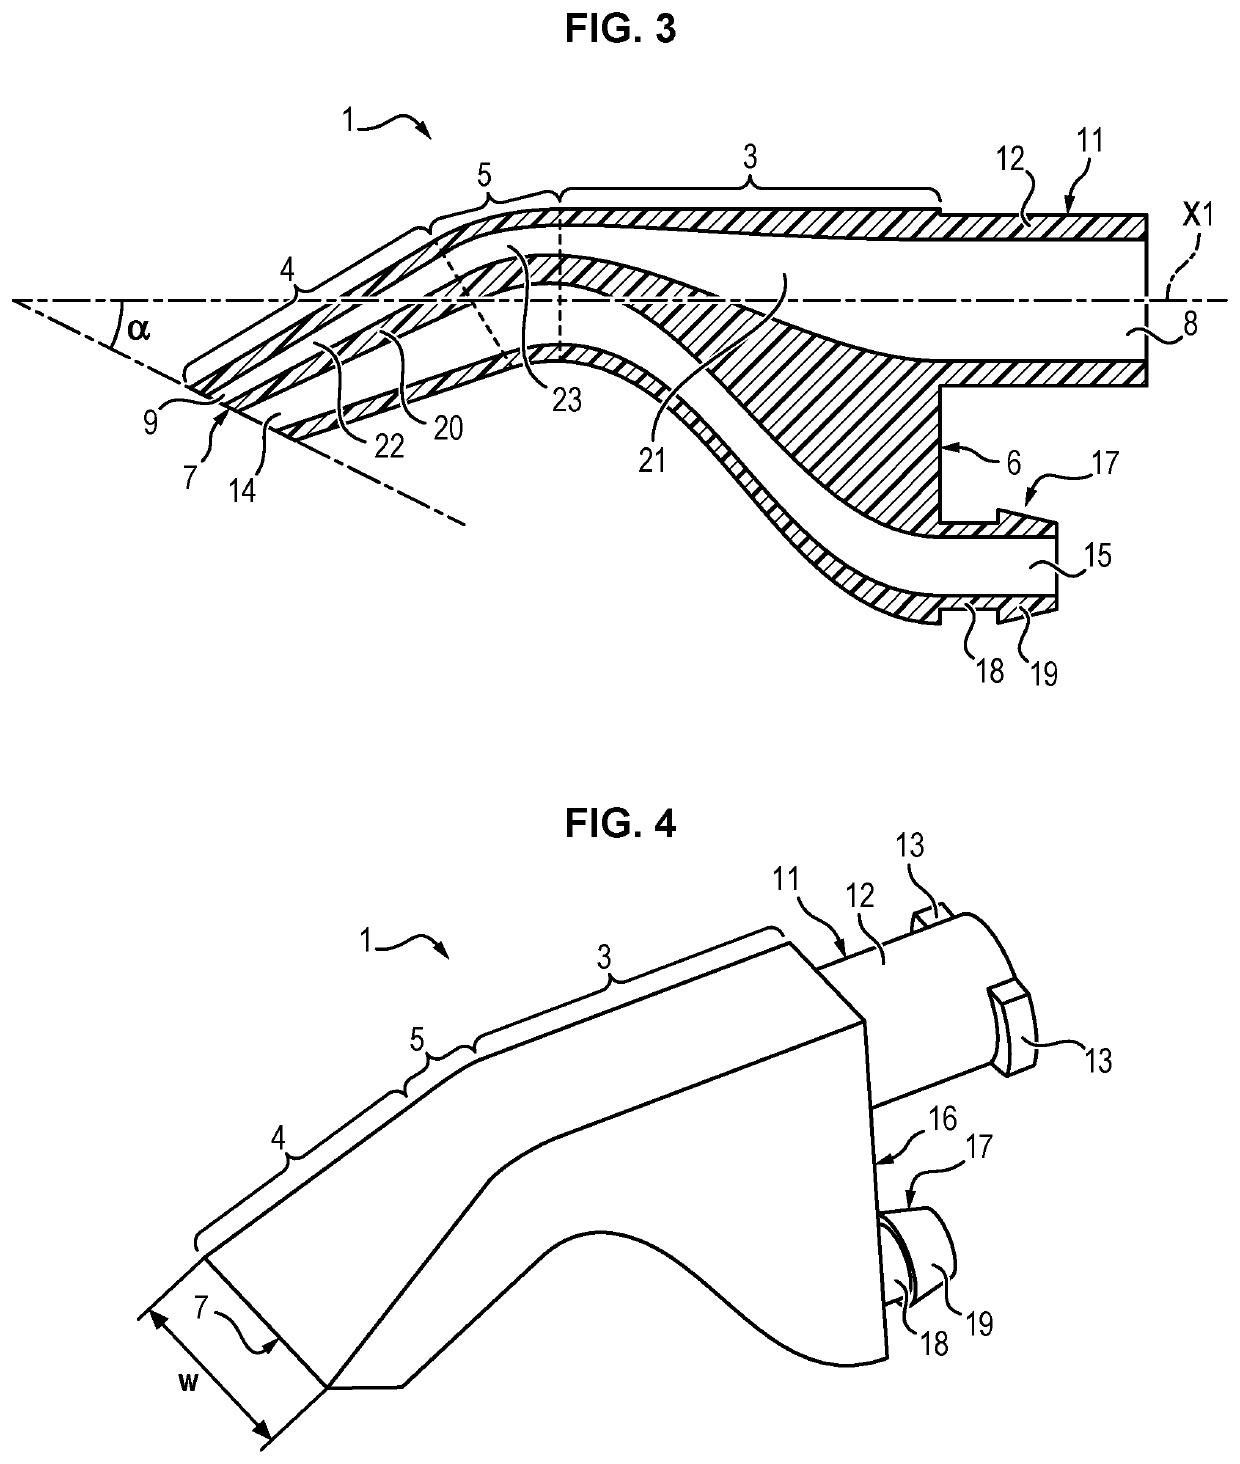 Applicator For Depositing A Layer Of Adhesive Or Sealant Composition On A Biological And/Or Prosthetic Tissue